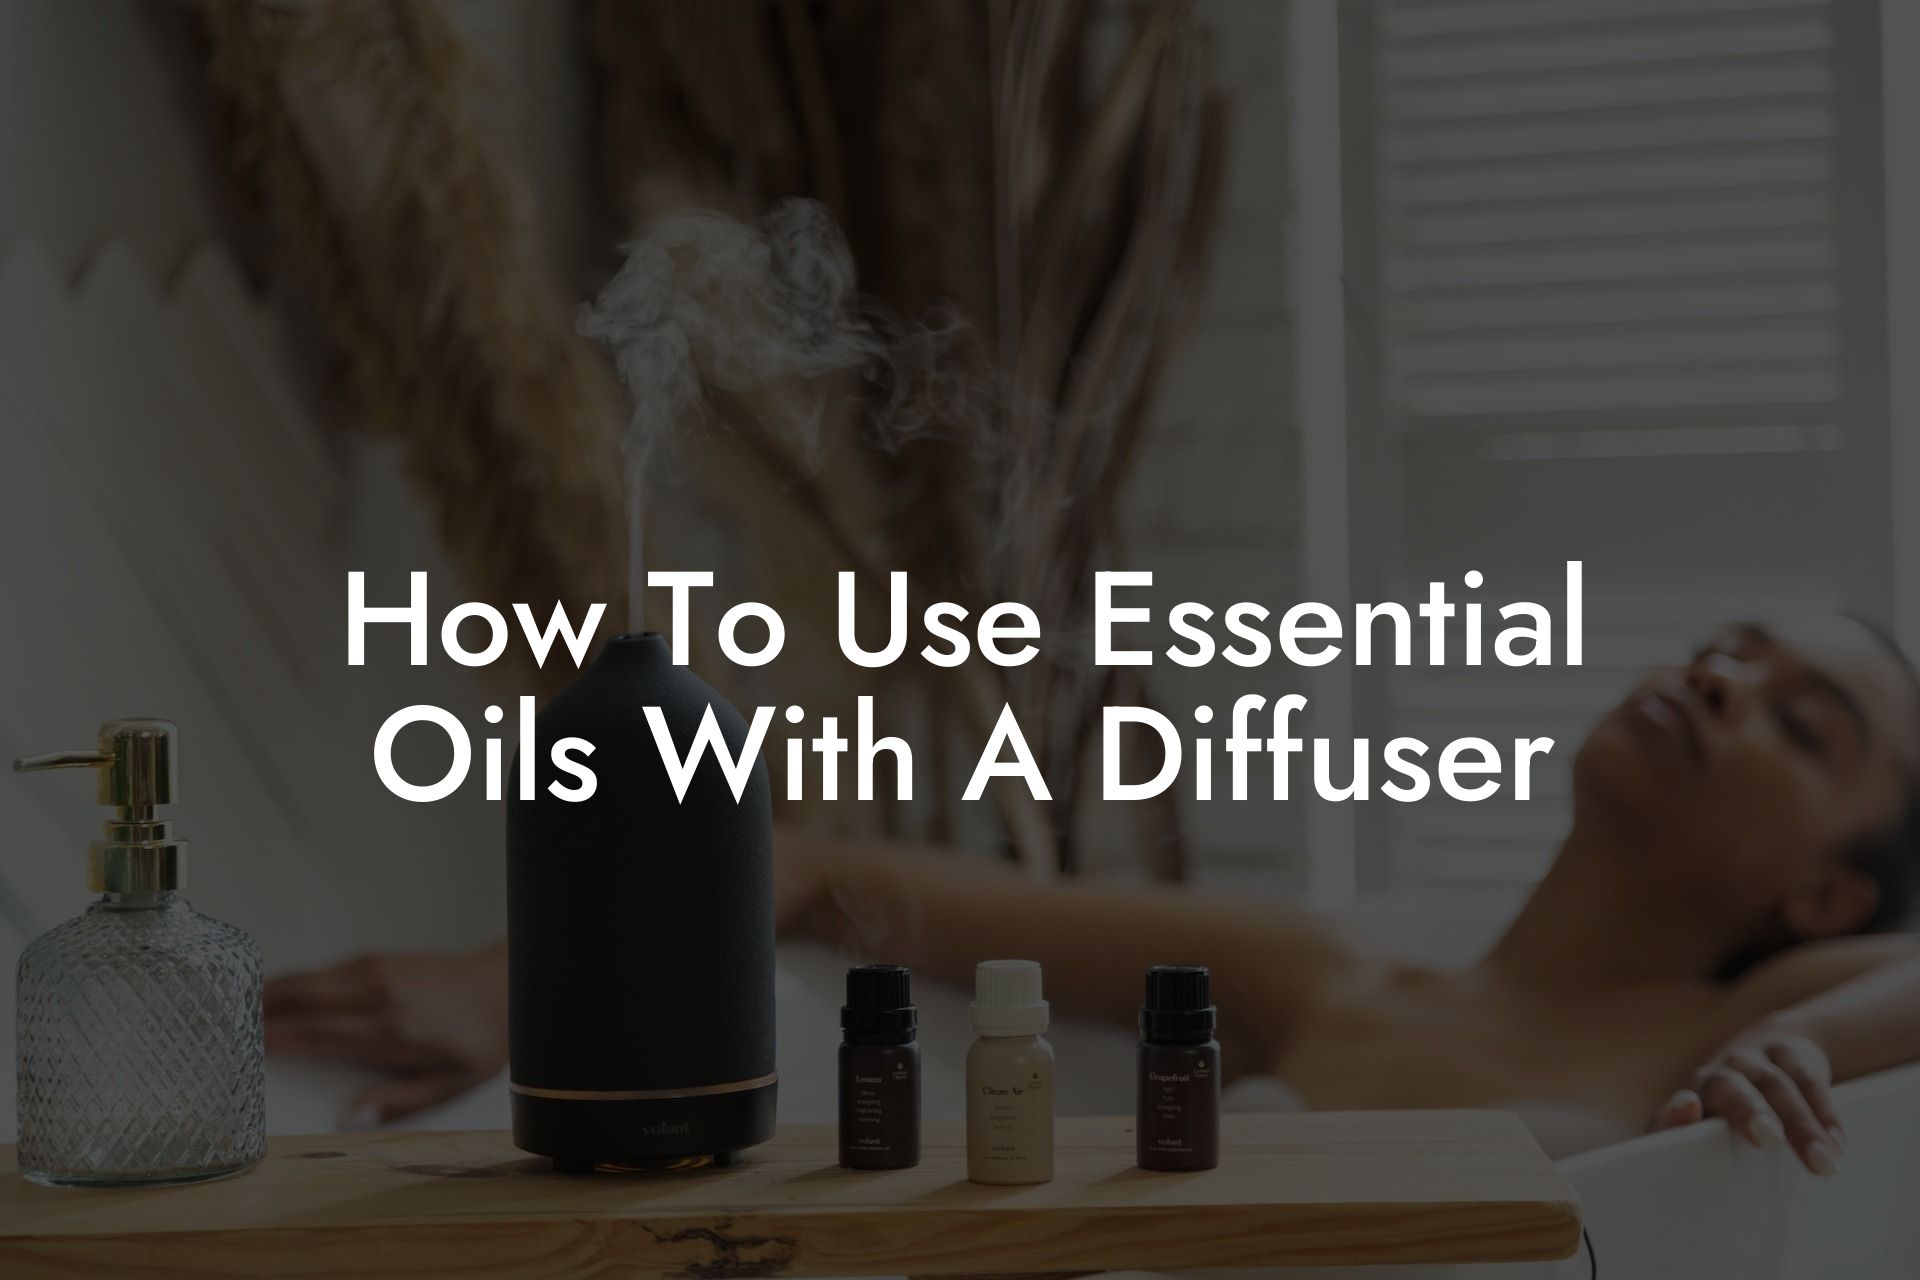 How To Use Essential Oils With A Diffuser